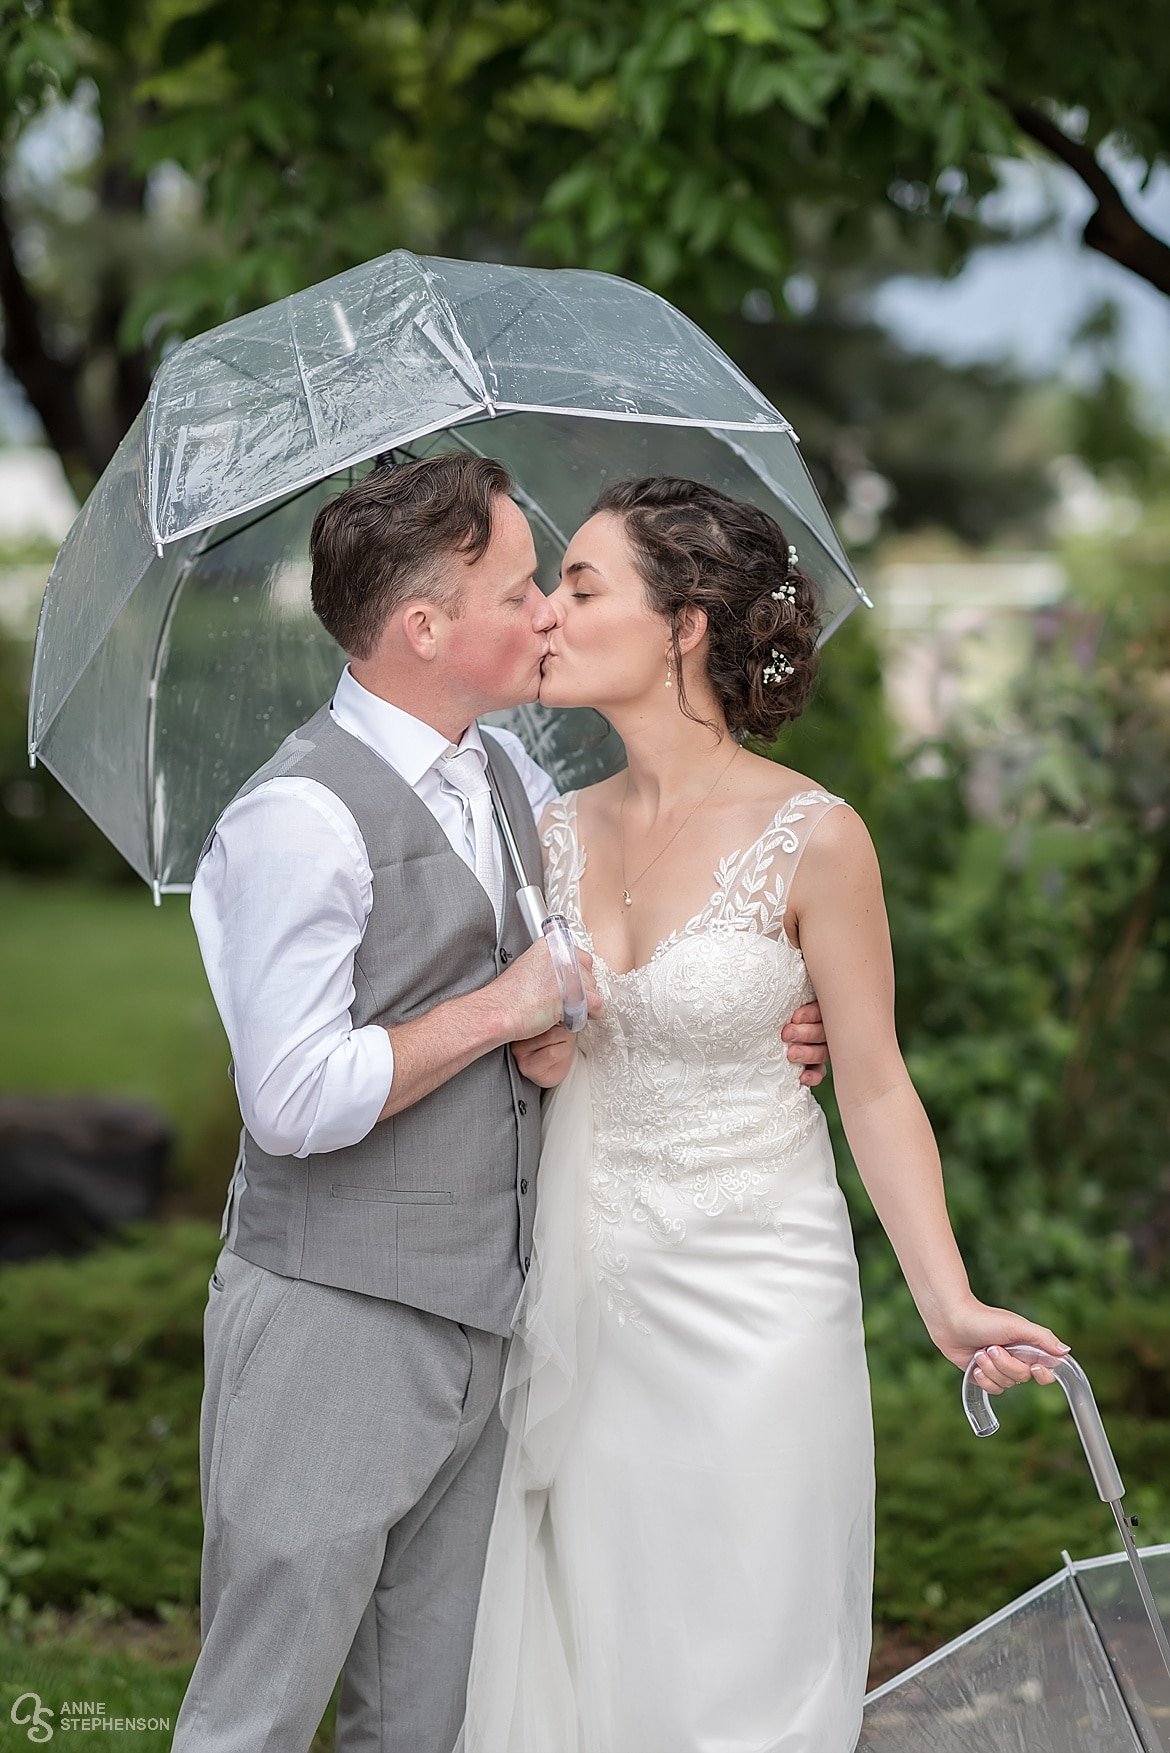 The groom shares his umbrella and a kiss with the bride.